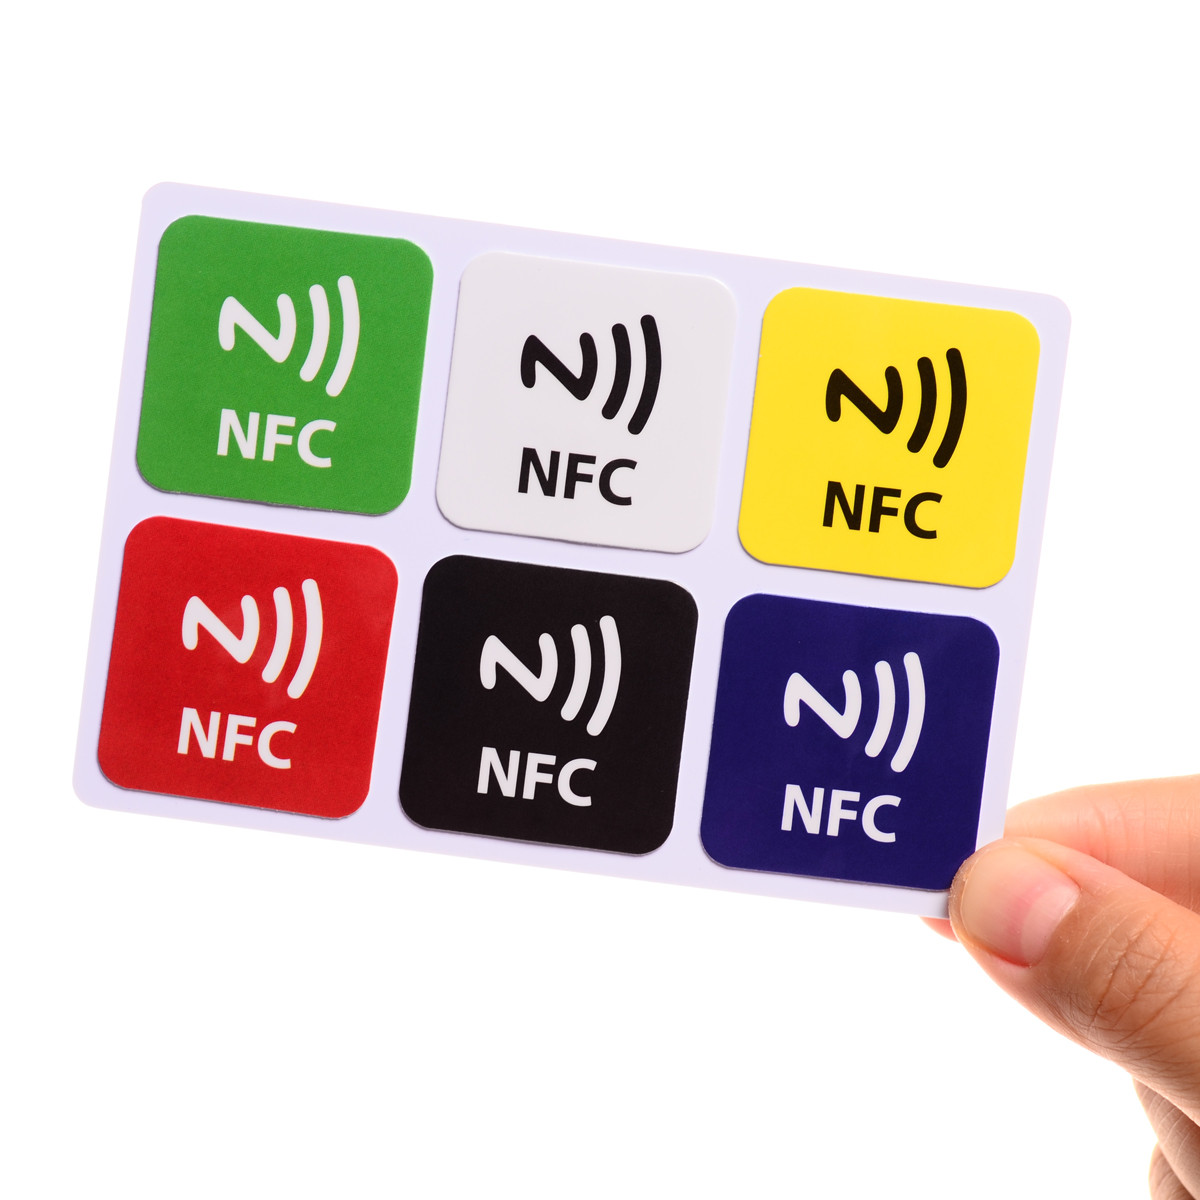 Wonderful NFC Projects to arouse your ideas